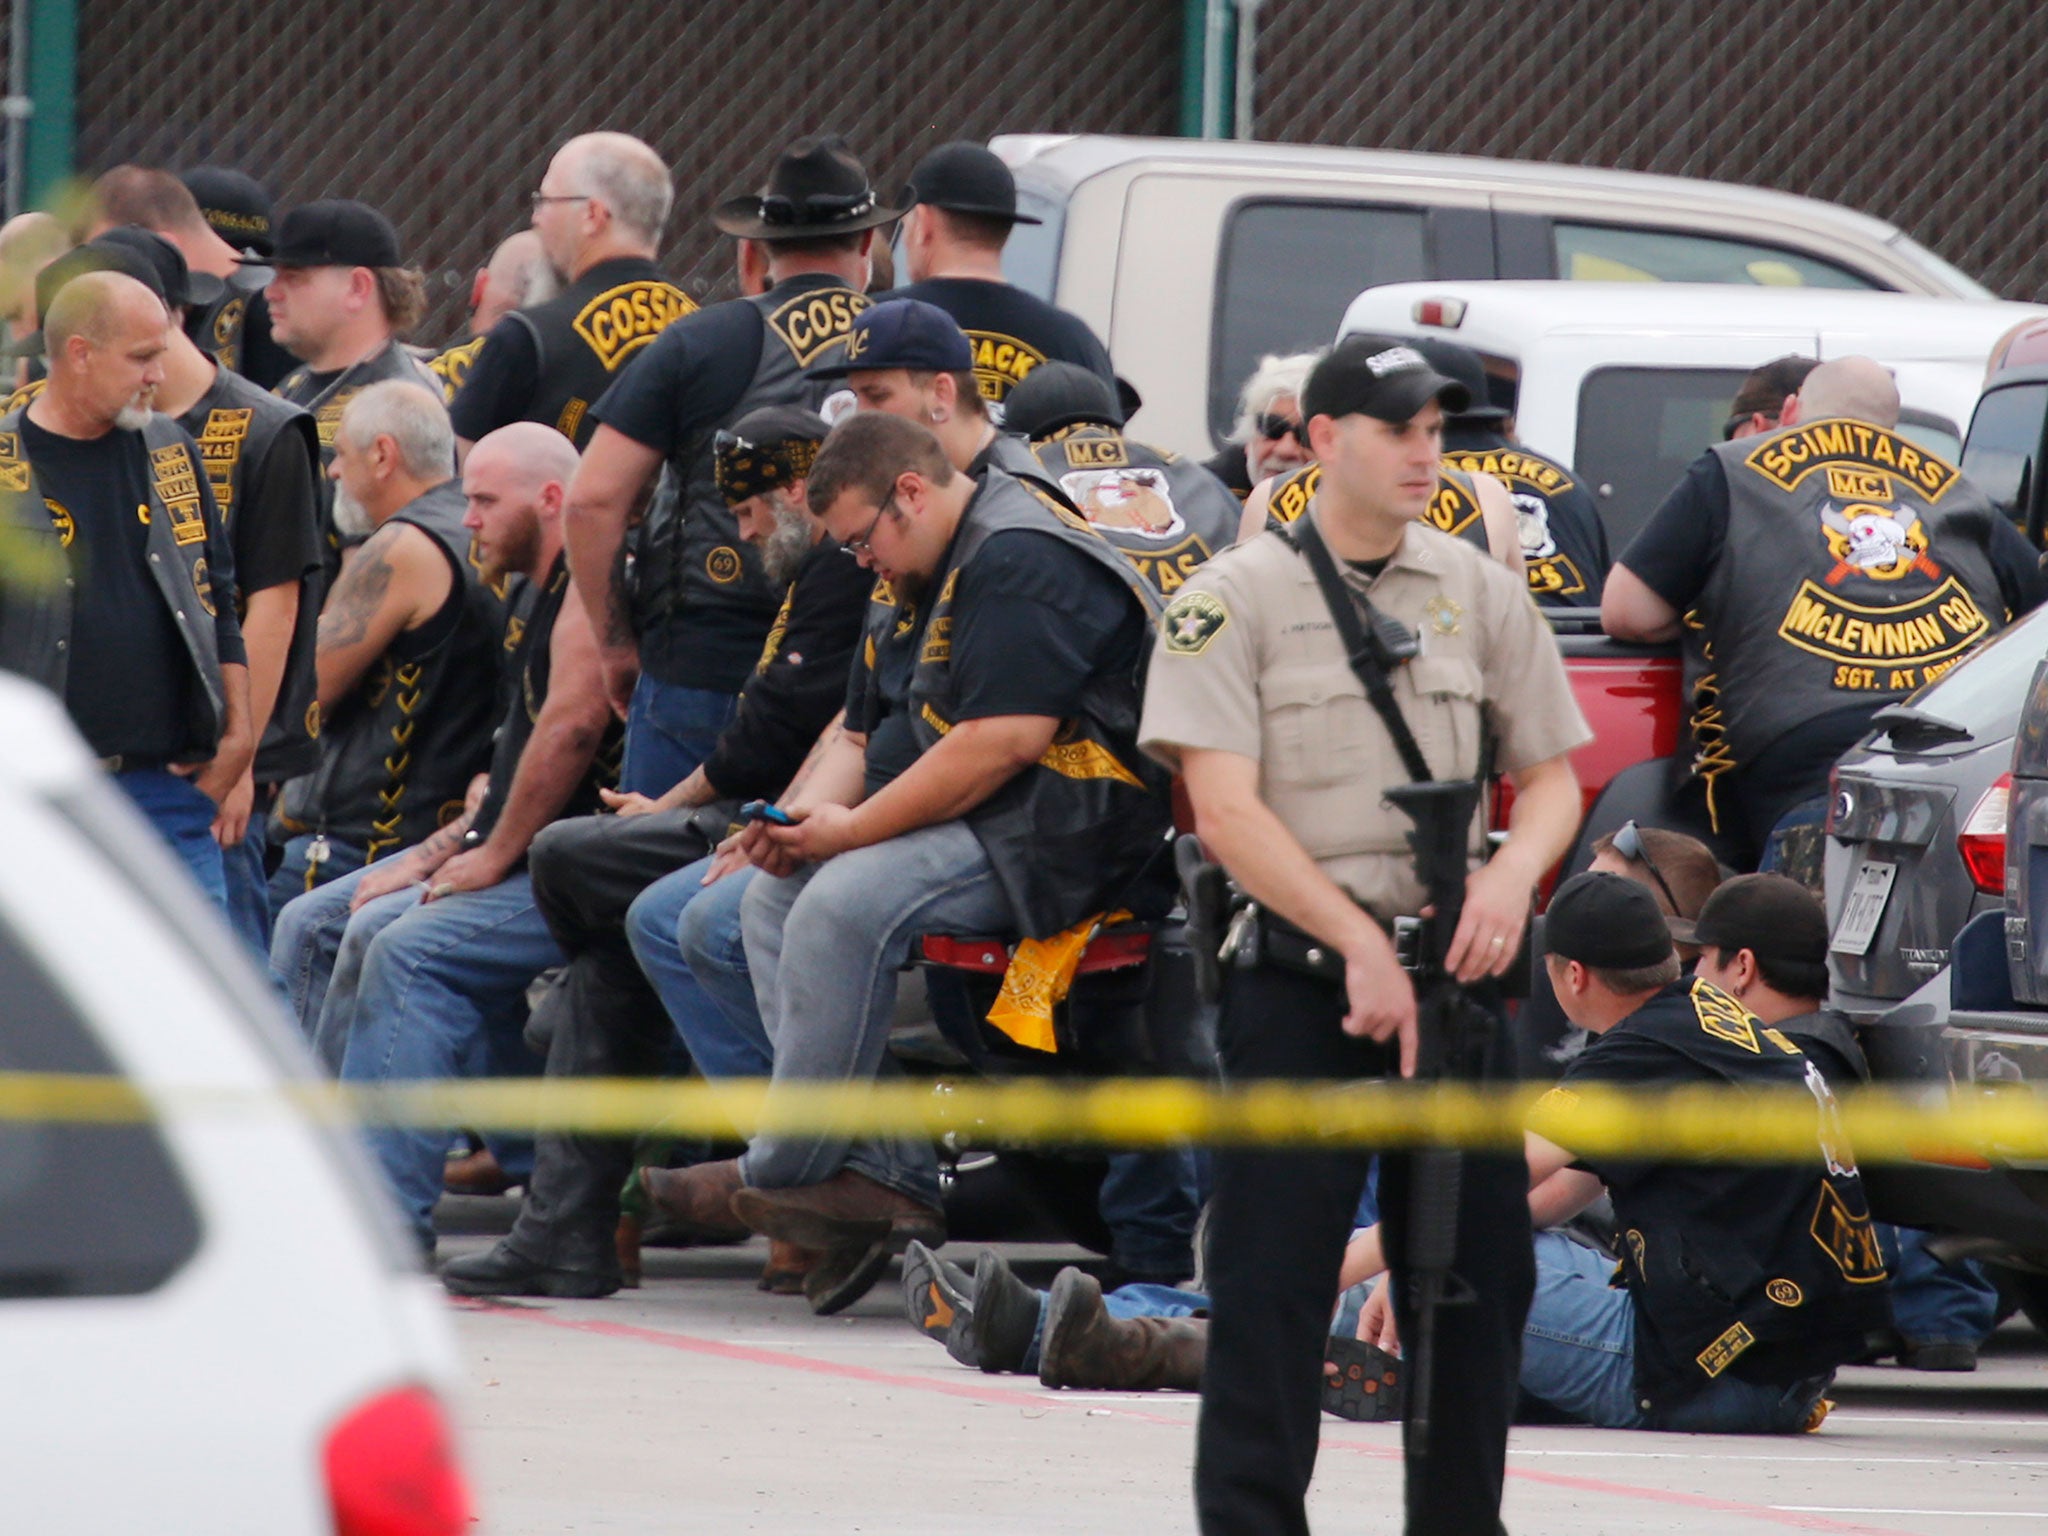 A McLennan County deputy stands guard near a group of bikers in the parking lot of a Twin Peaks restaurant in Waco, Texas. Police Sgt. W. Patrick Swanton told KWTX-TV there were 'multiple victims' after gunfire erupted between rival biker gangs at the restaurant